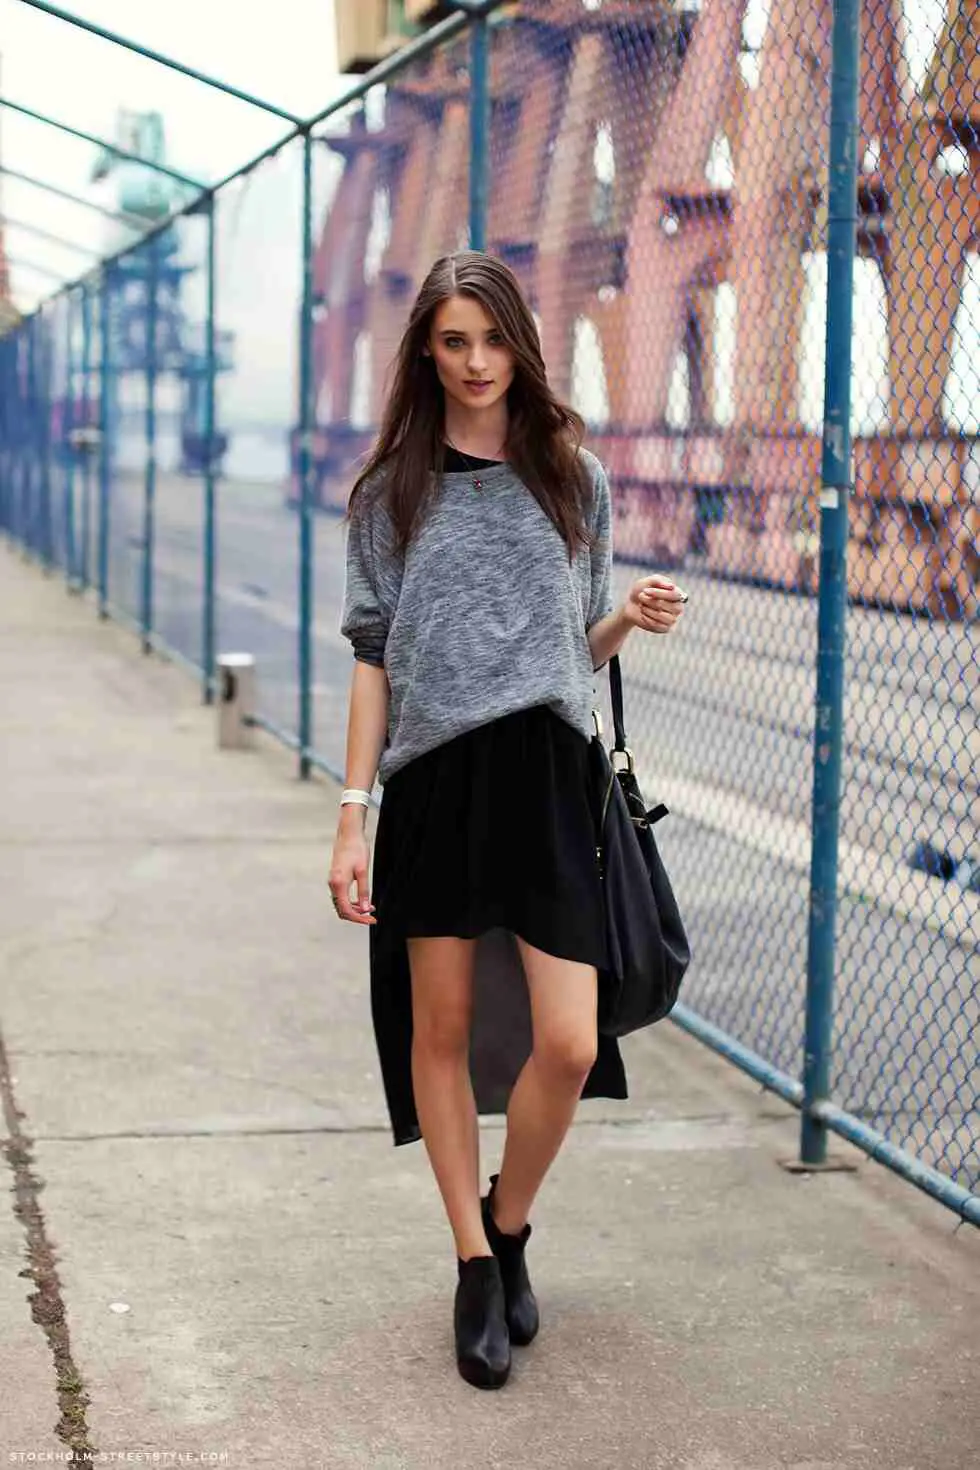 black-outfit-and-gray-top